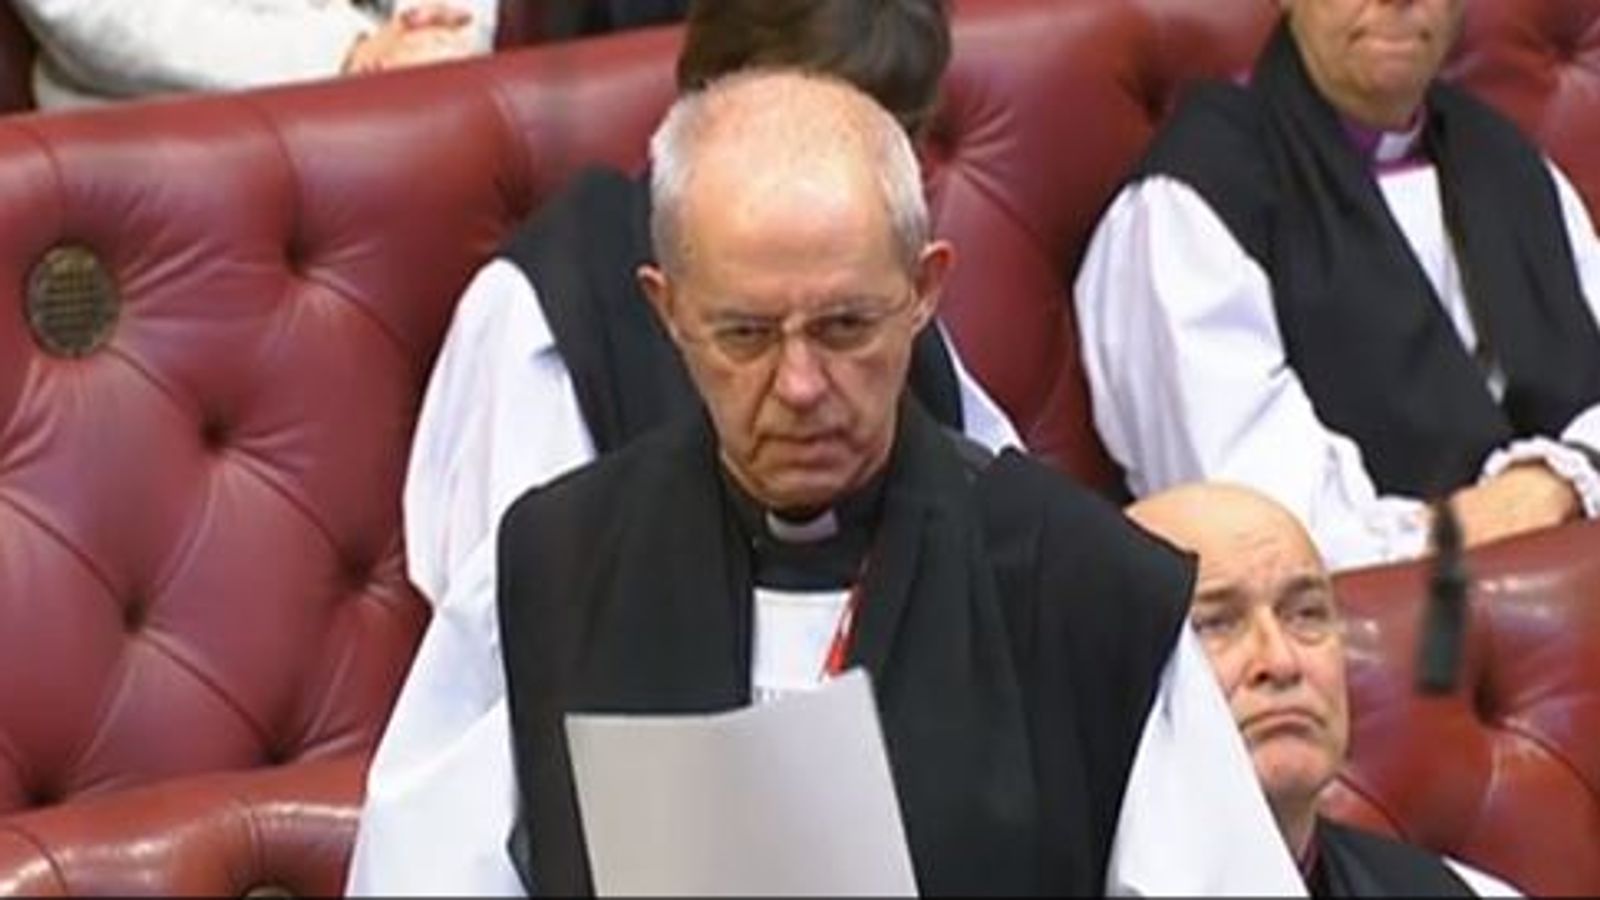 Archbishop of Canterbury Justin Welby warns visa changes will harm family relationships